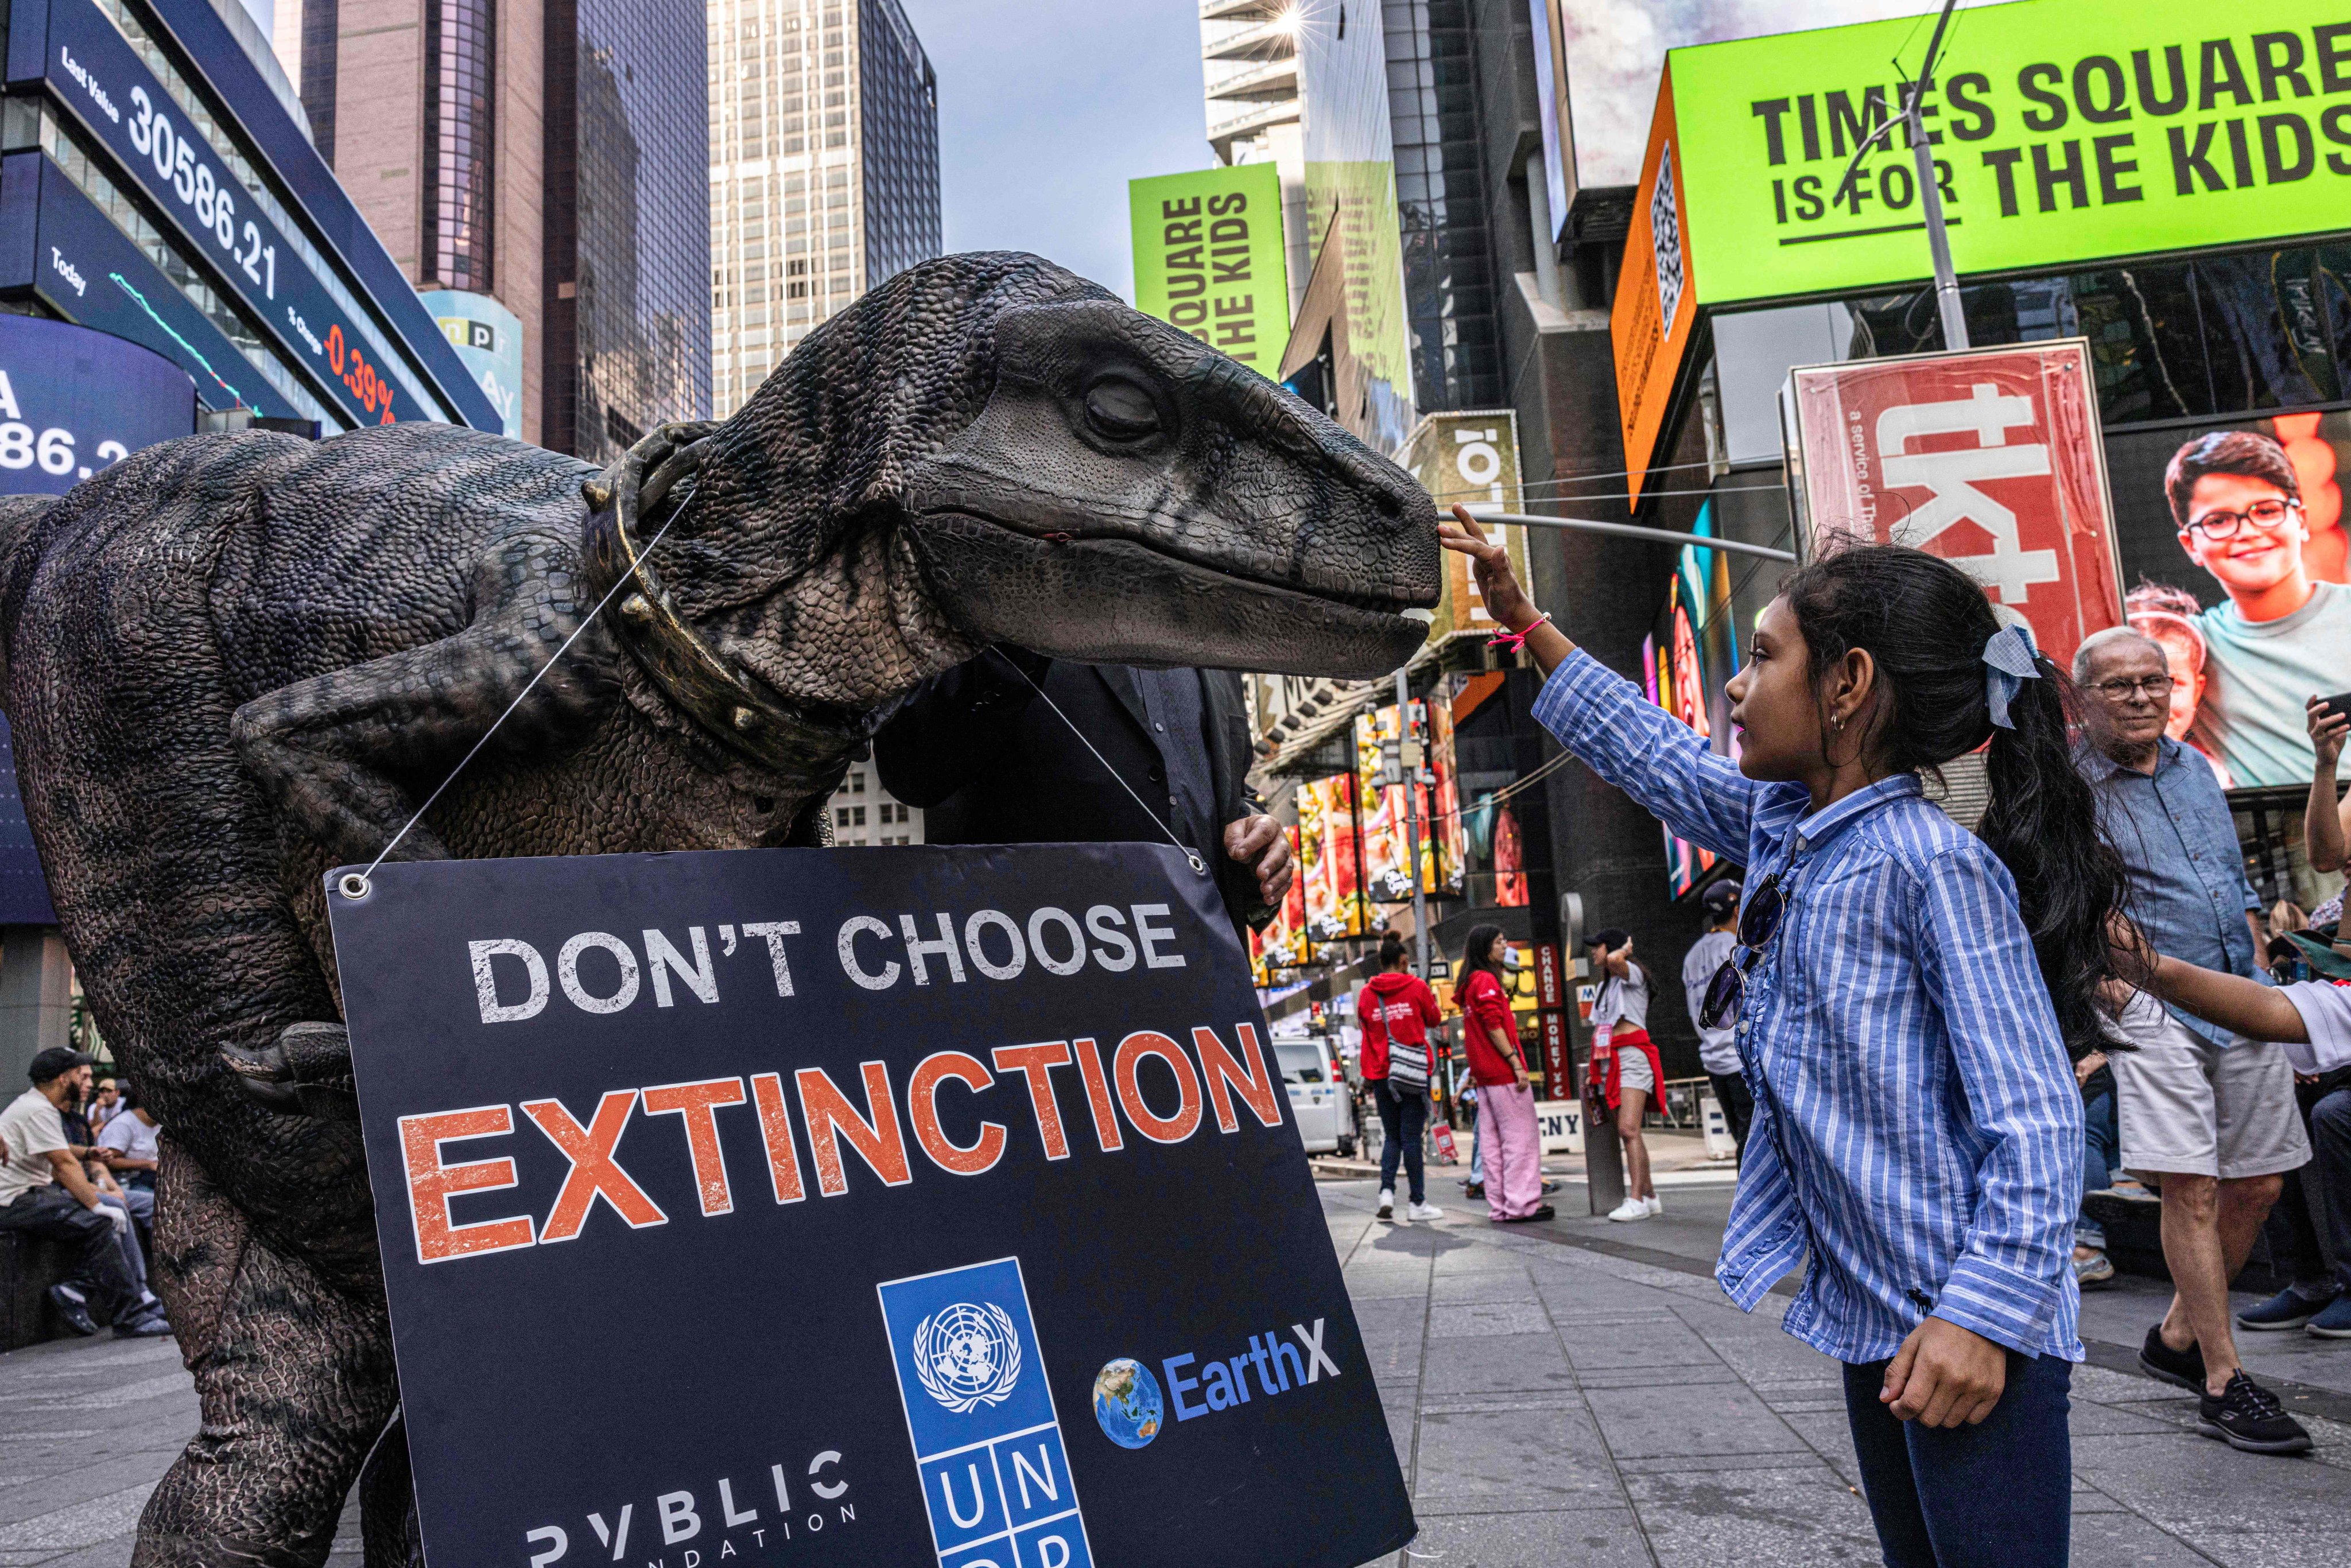 A young girl pets Frankie the Dinosaur, mascot of the UNDP’s “Don’t Choose Extinction” campaign, in Times Square, New York on September 21, 2022. Photo: AFP